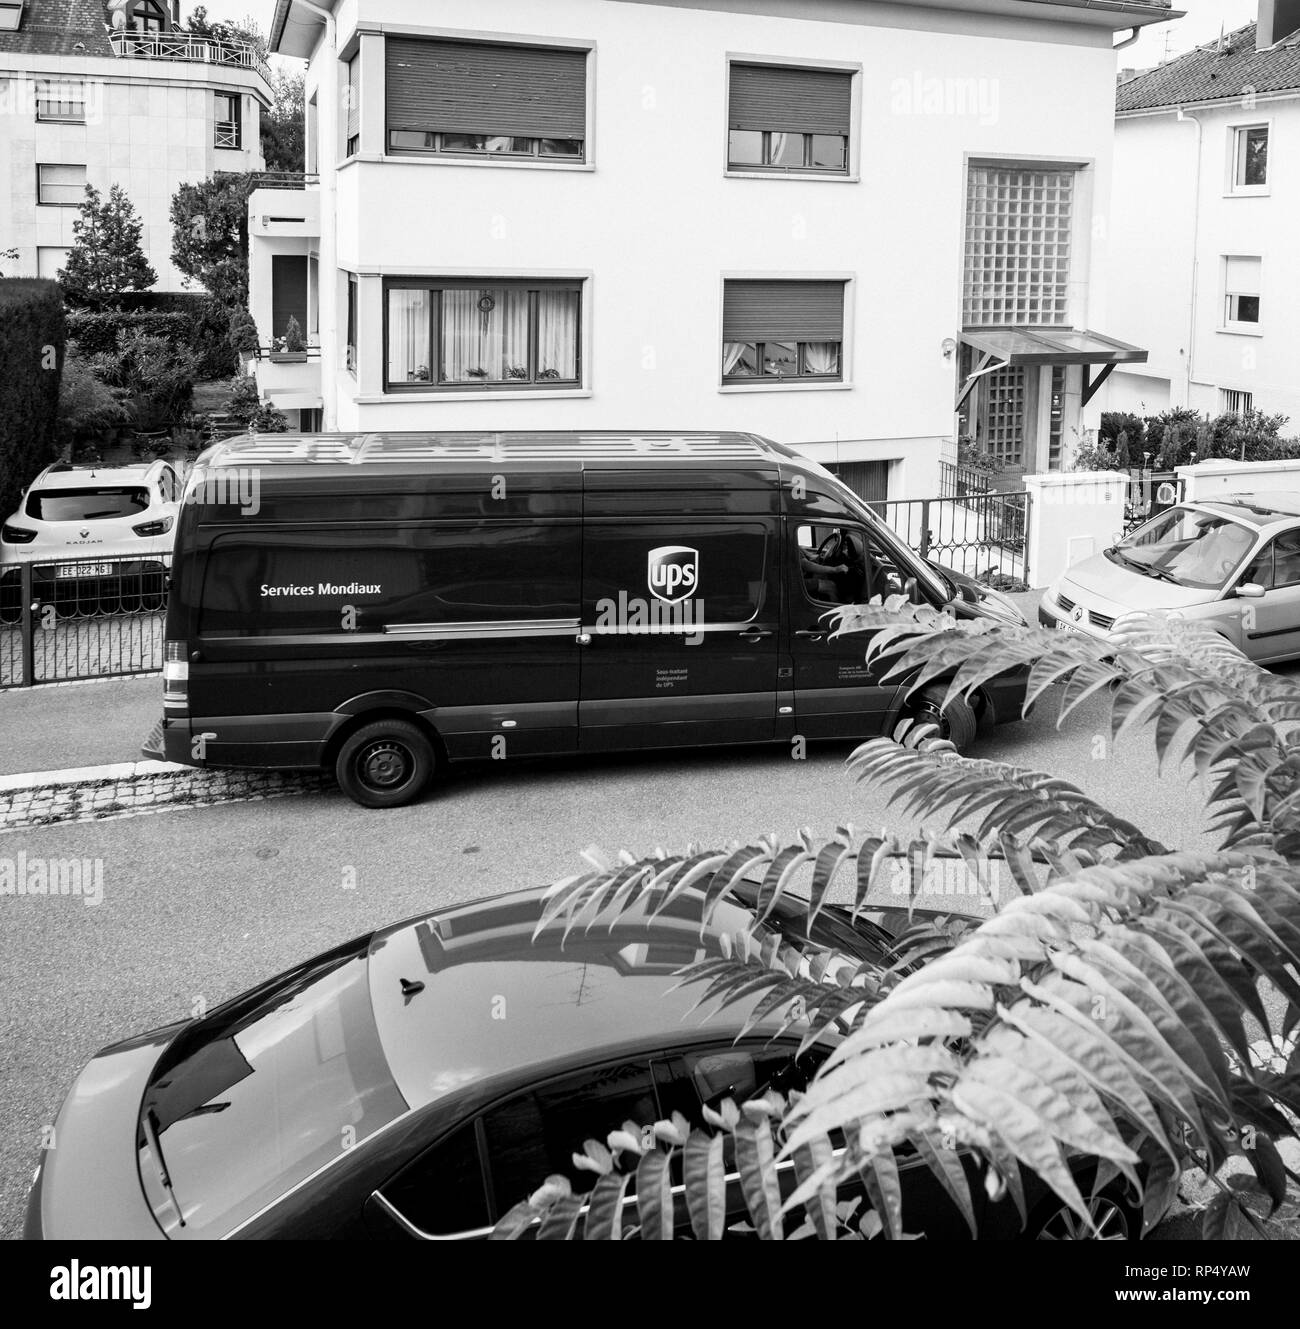 PARIS, FRANCE - AUG 24, 2017: UPS United PArcel Service brown delivery van with cardboard parcel in the hands delivering the on time delivering package parcel elevated view Stock Photo